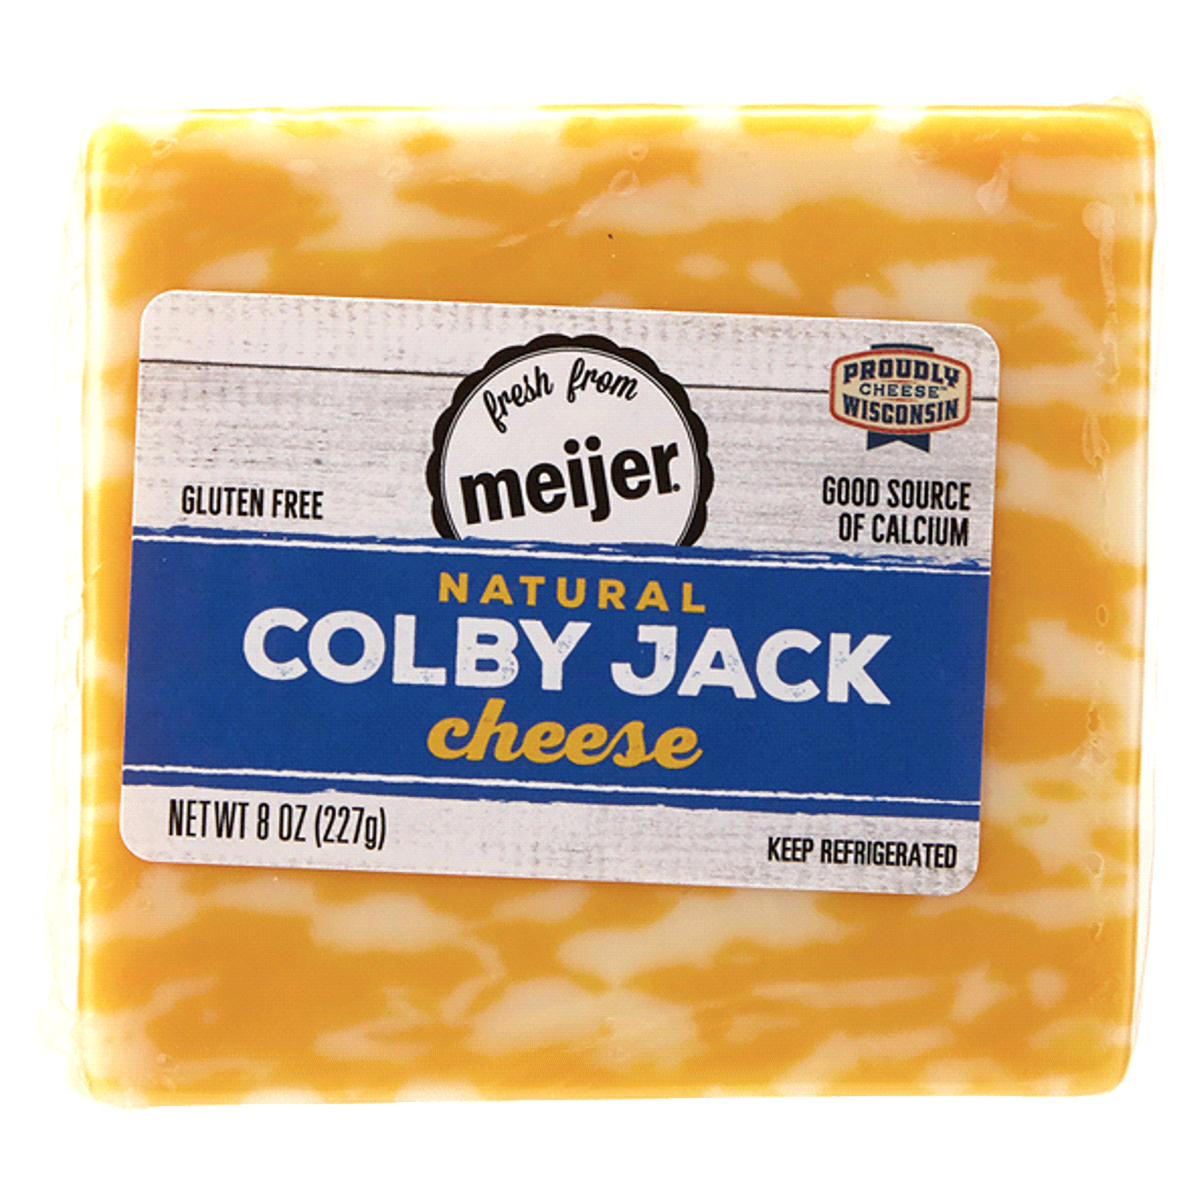 slide 1 of 5, Fresh from Meijer Natural Colby Jack Cheese, 8 oz